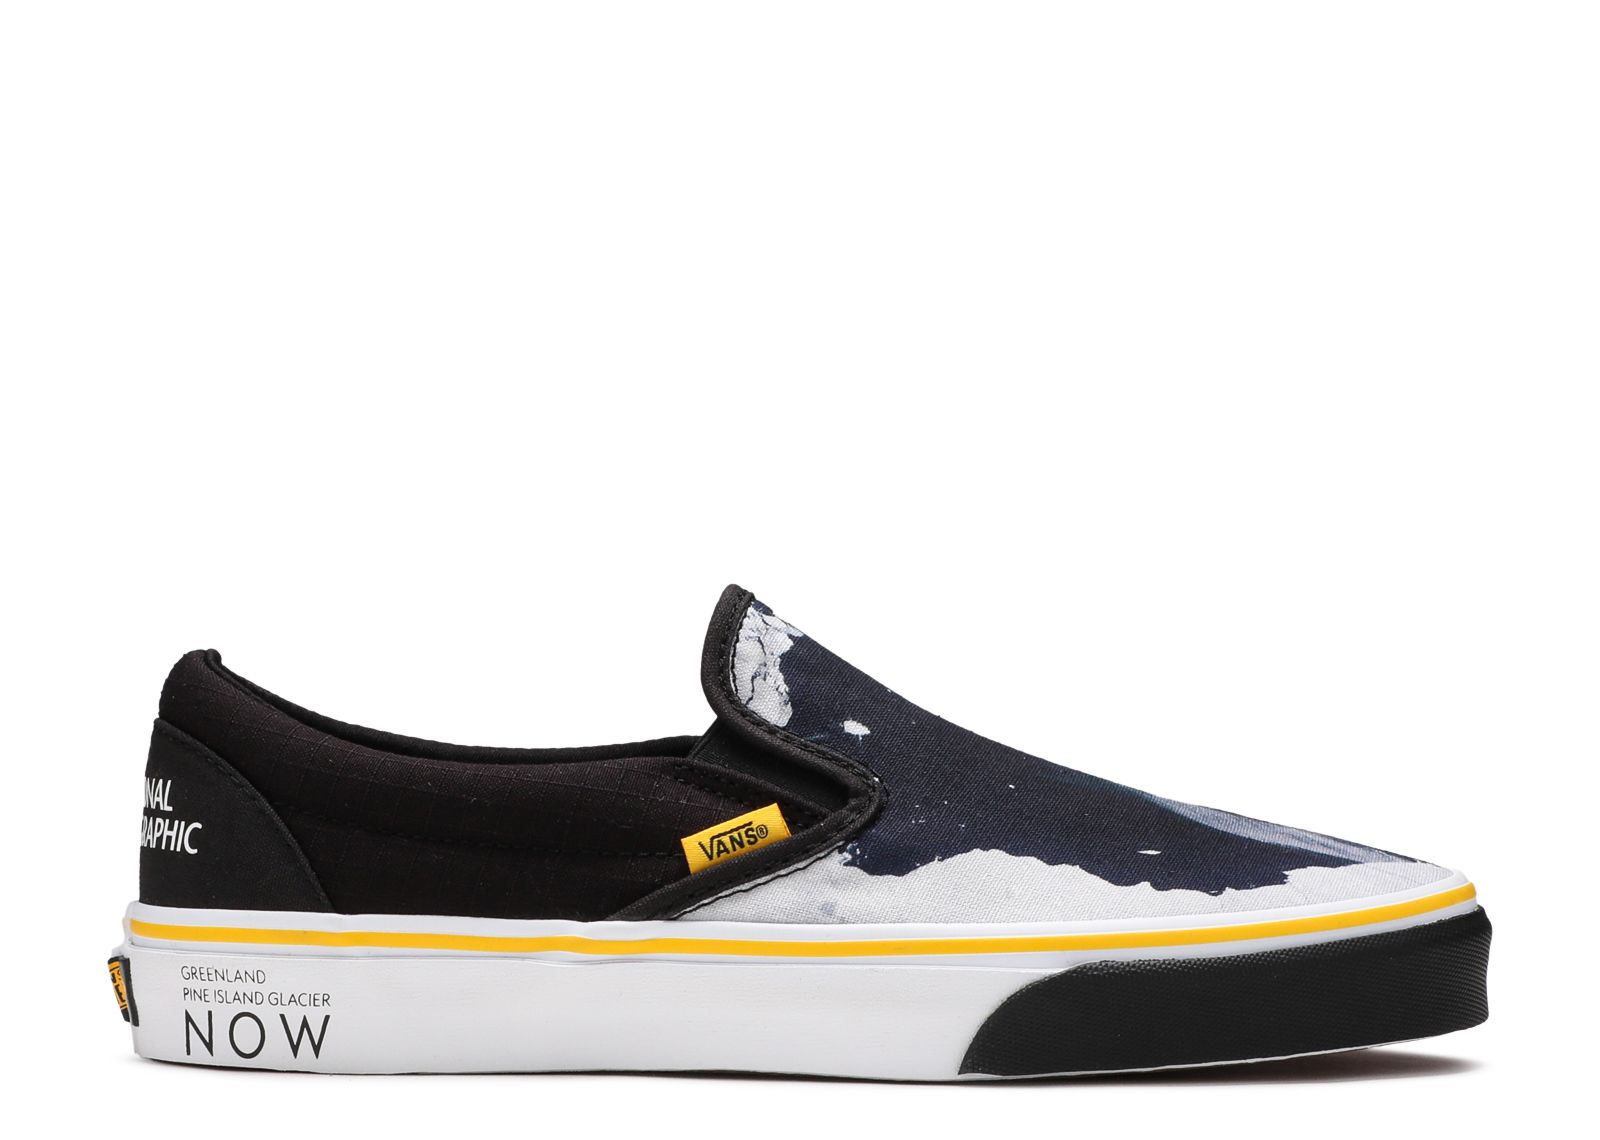 Кроссовки Vans National Geographic X Classic Slip-On 'Then Now Glacier', черный сумка national geographic africa ng a4470 waist pack